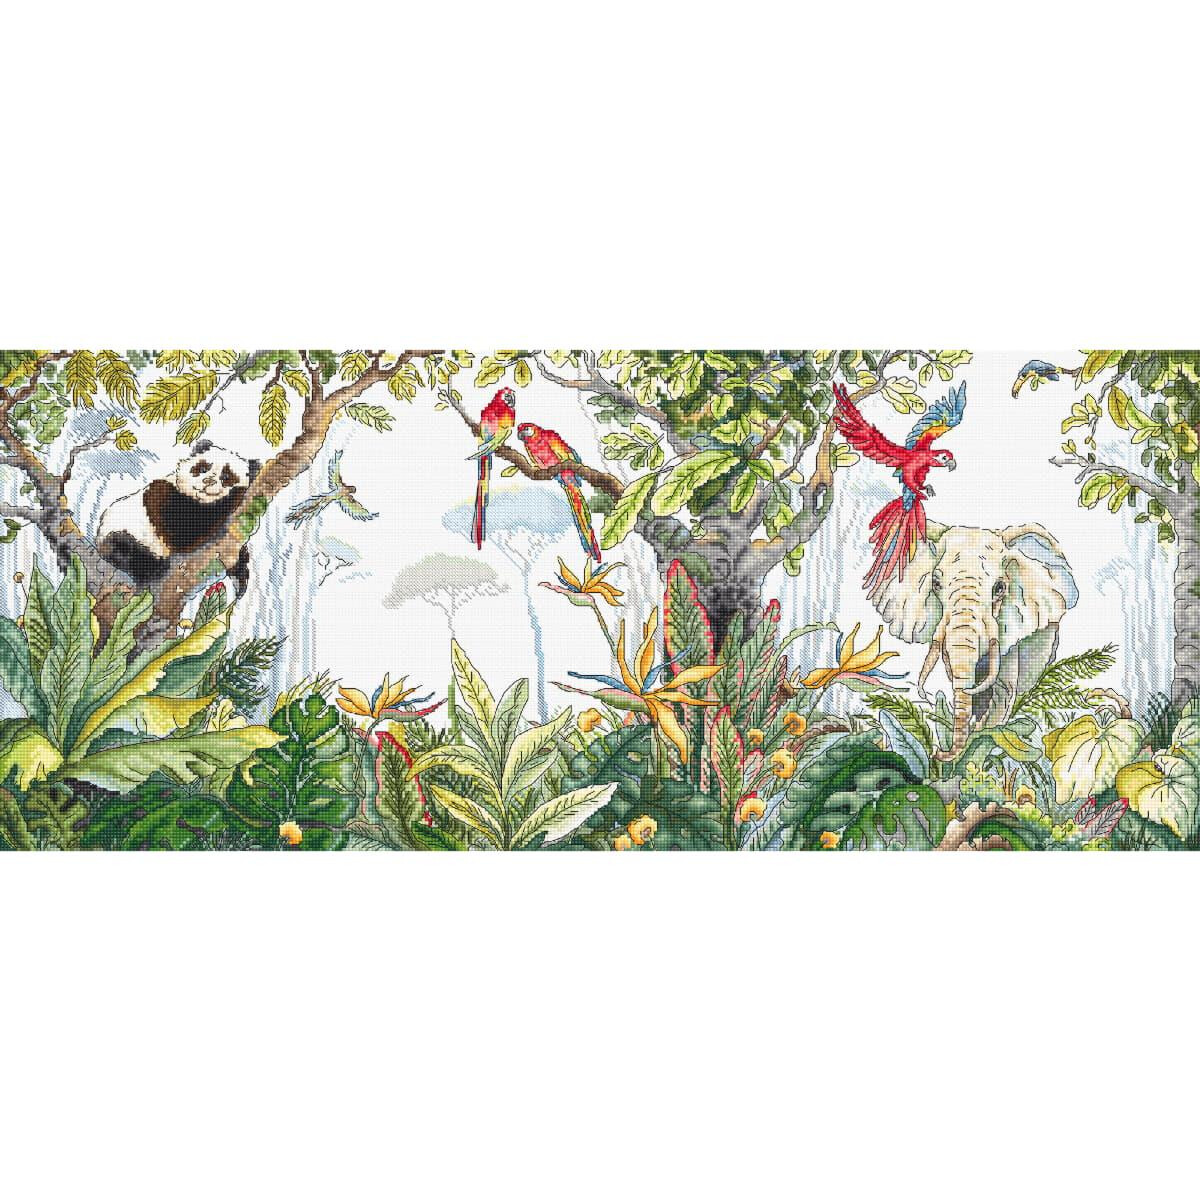 Illustration of a lively jungle scene. Lush, tropical...